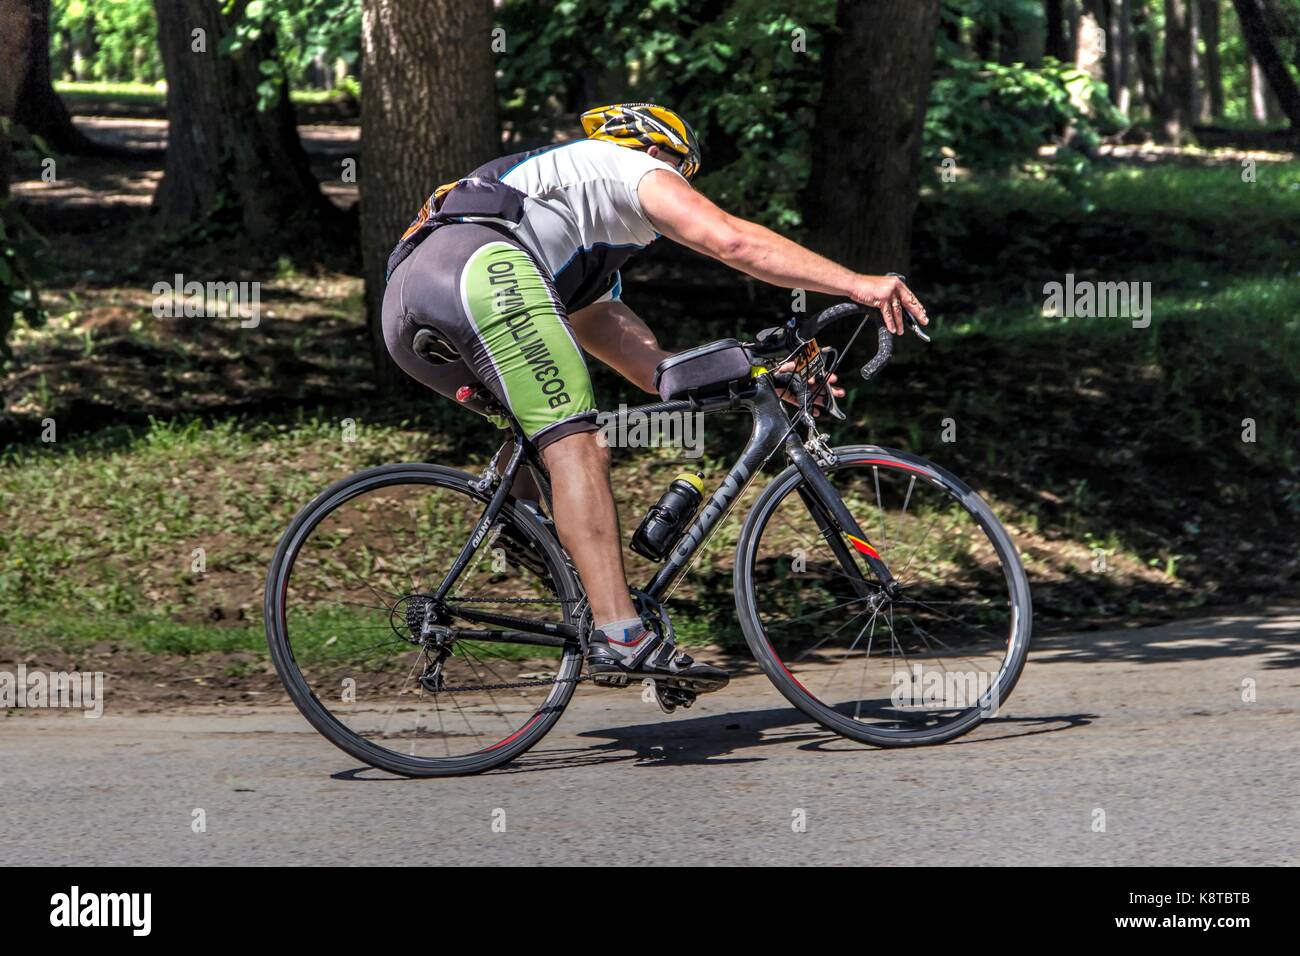 Belgrade, Serbia - The cyclist competes in a cycling race Stock Photo